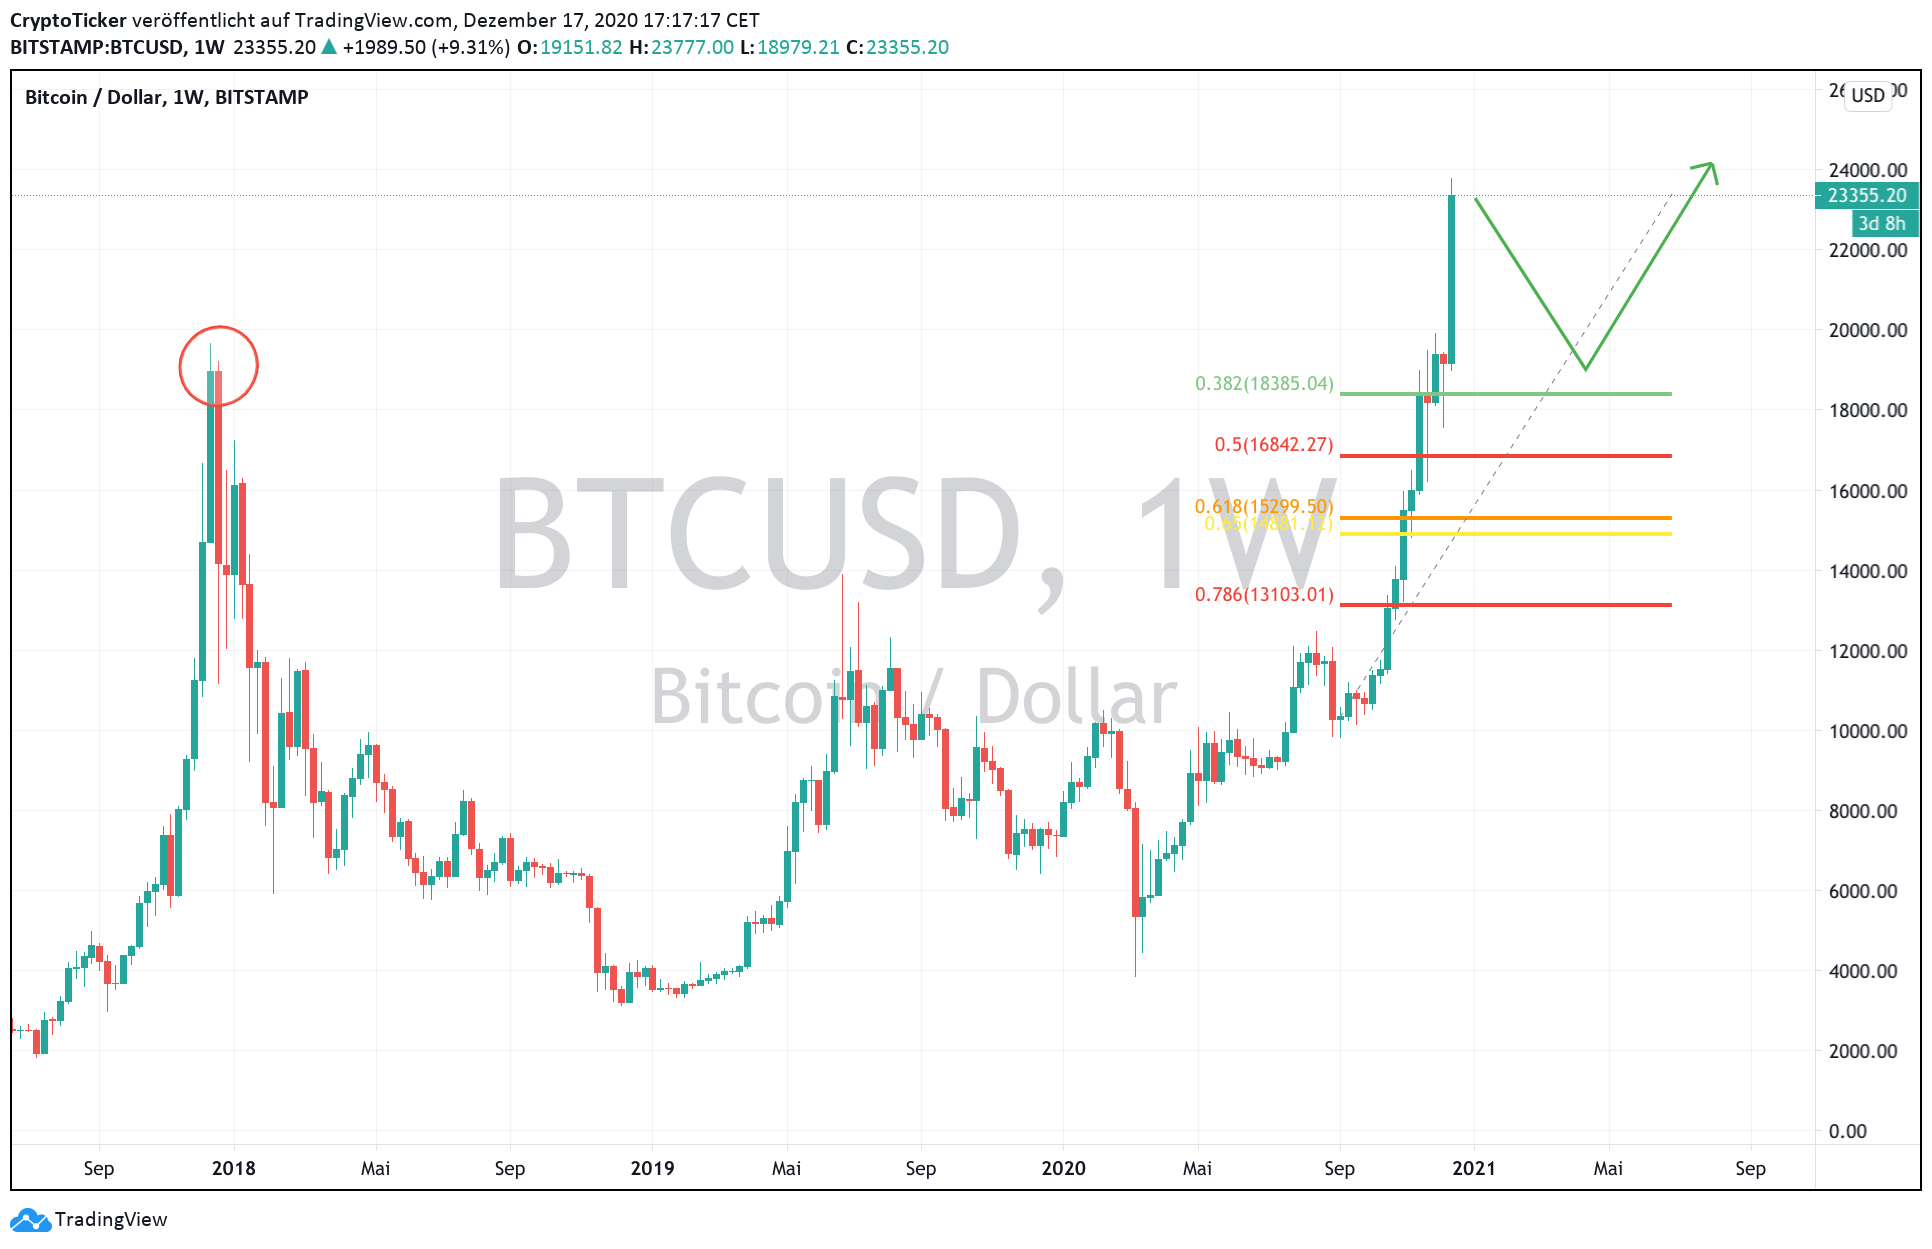 BTC/USD 1-Week chart, showing a potential retracement